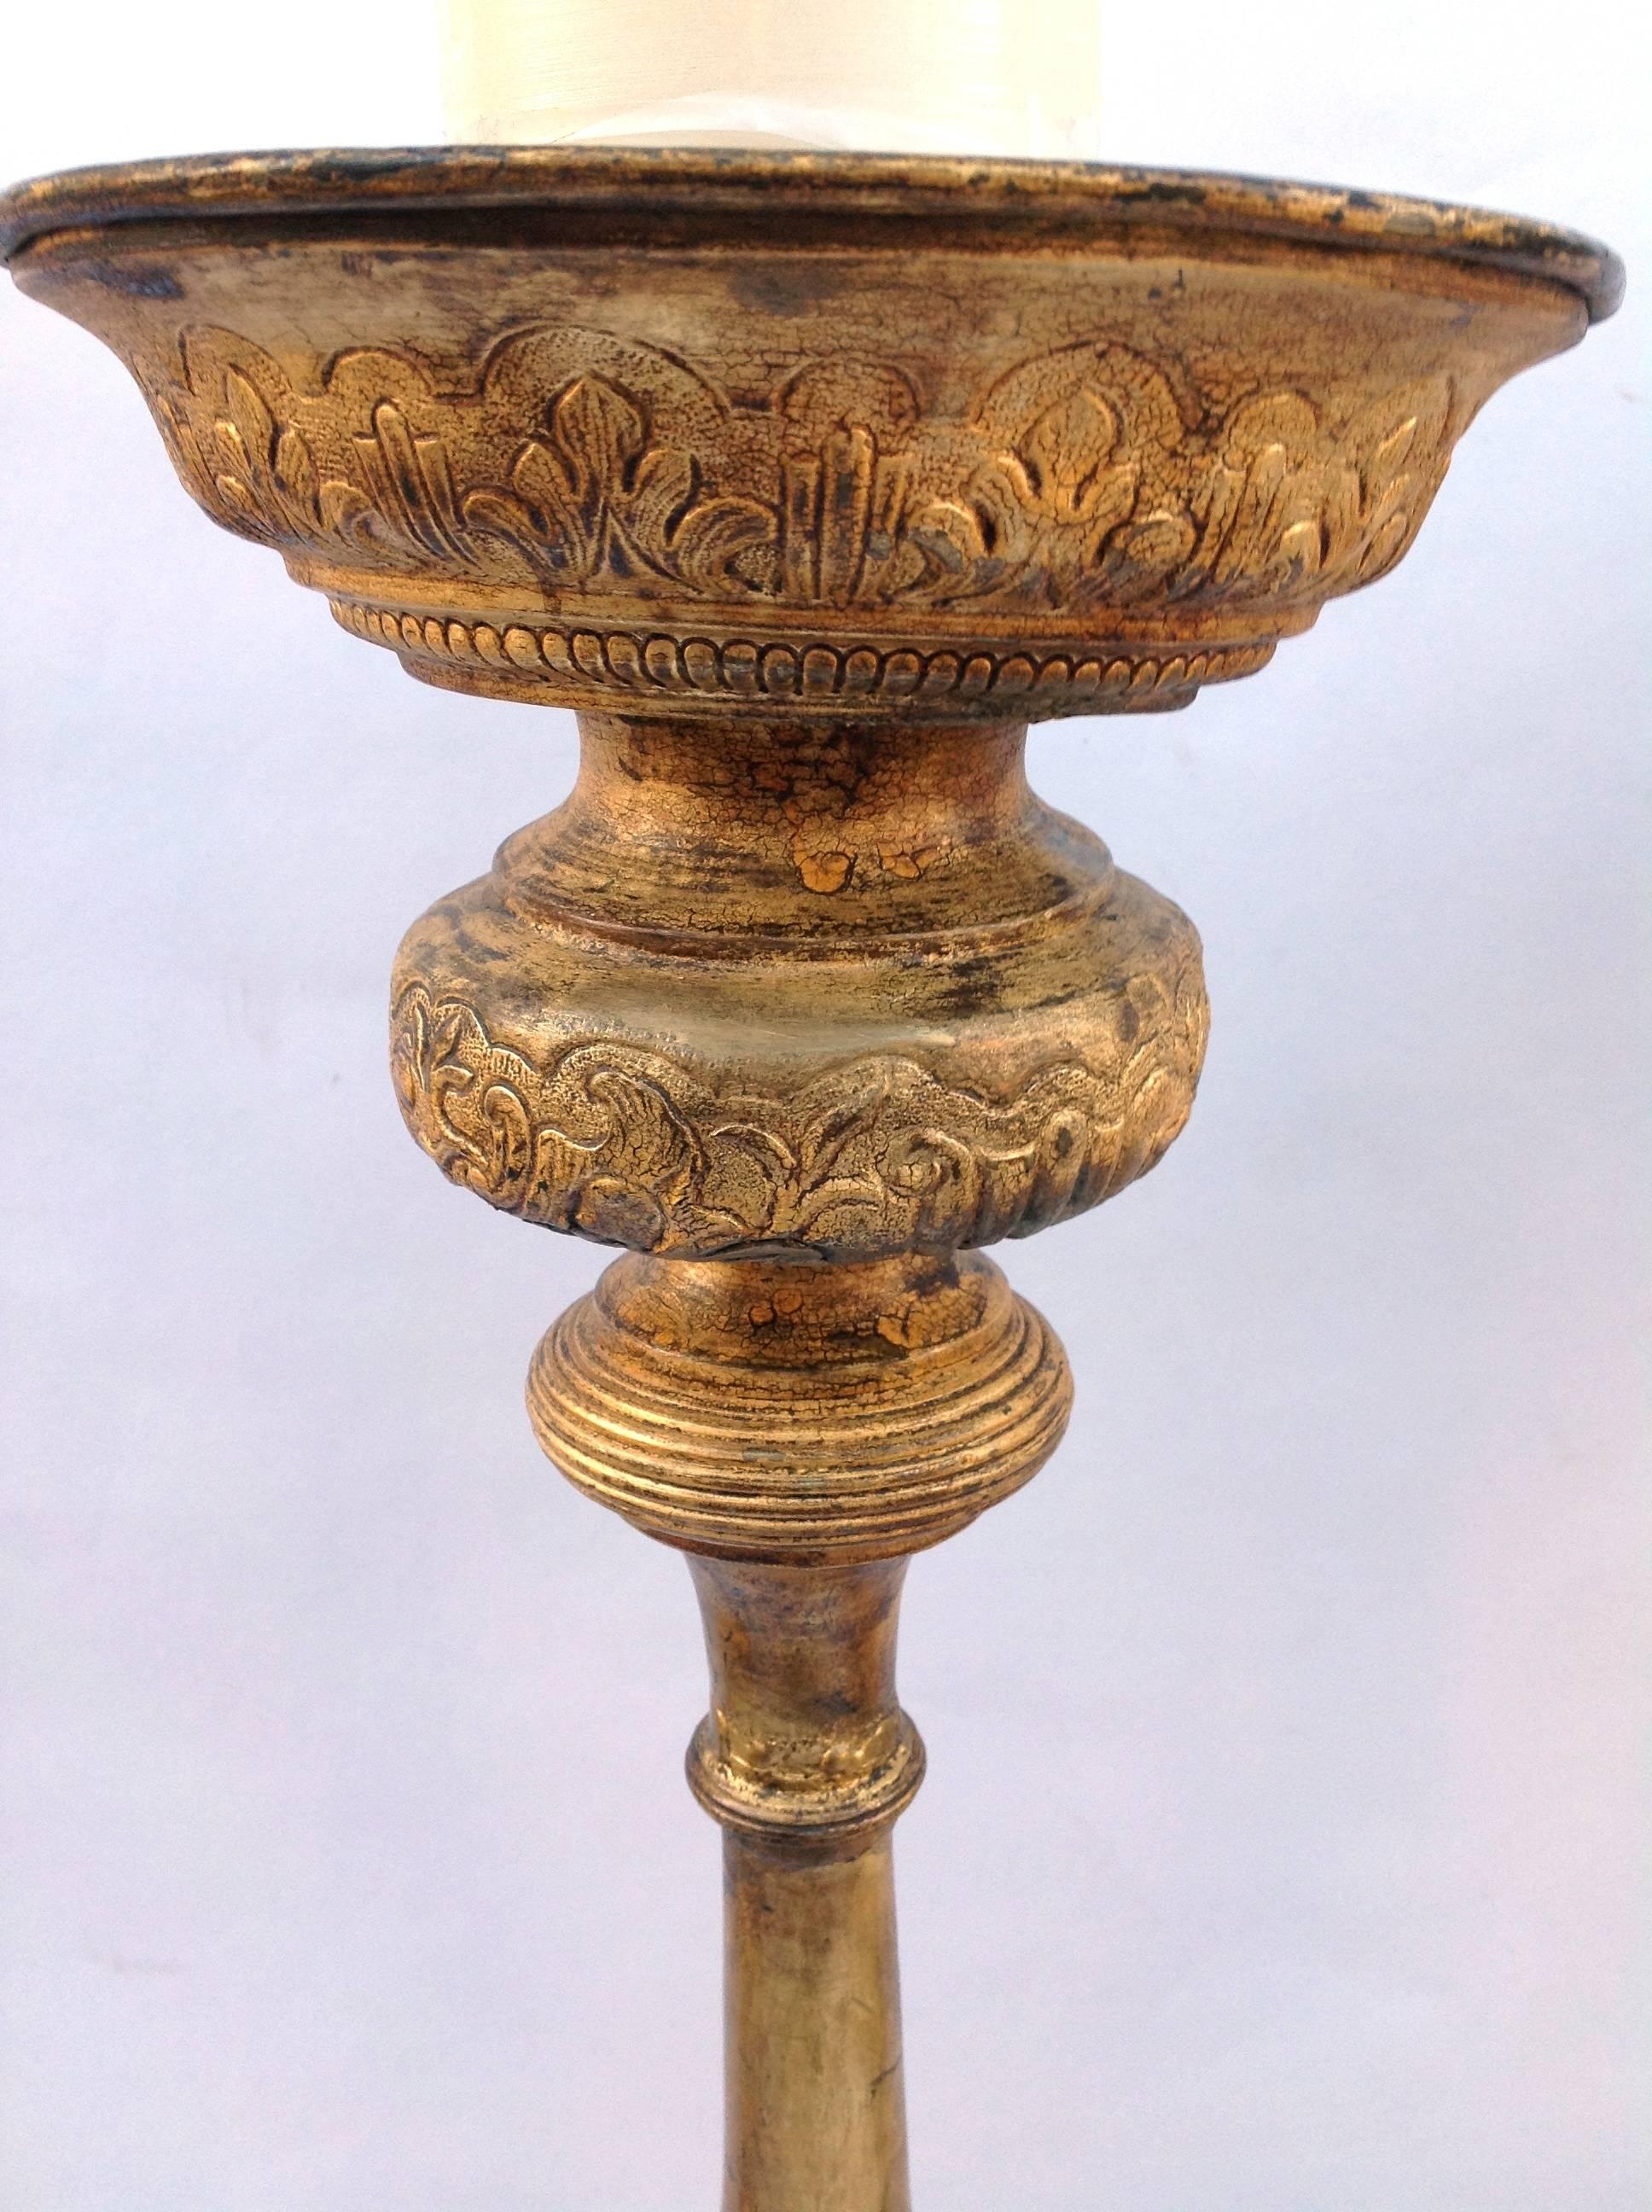 Pair of large candleholders, embossed and gilded metal, Italy, 19th century
with motifs-of-pearls, scrolls and leaves.
Baroque style.